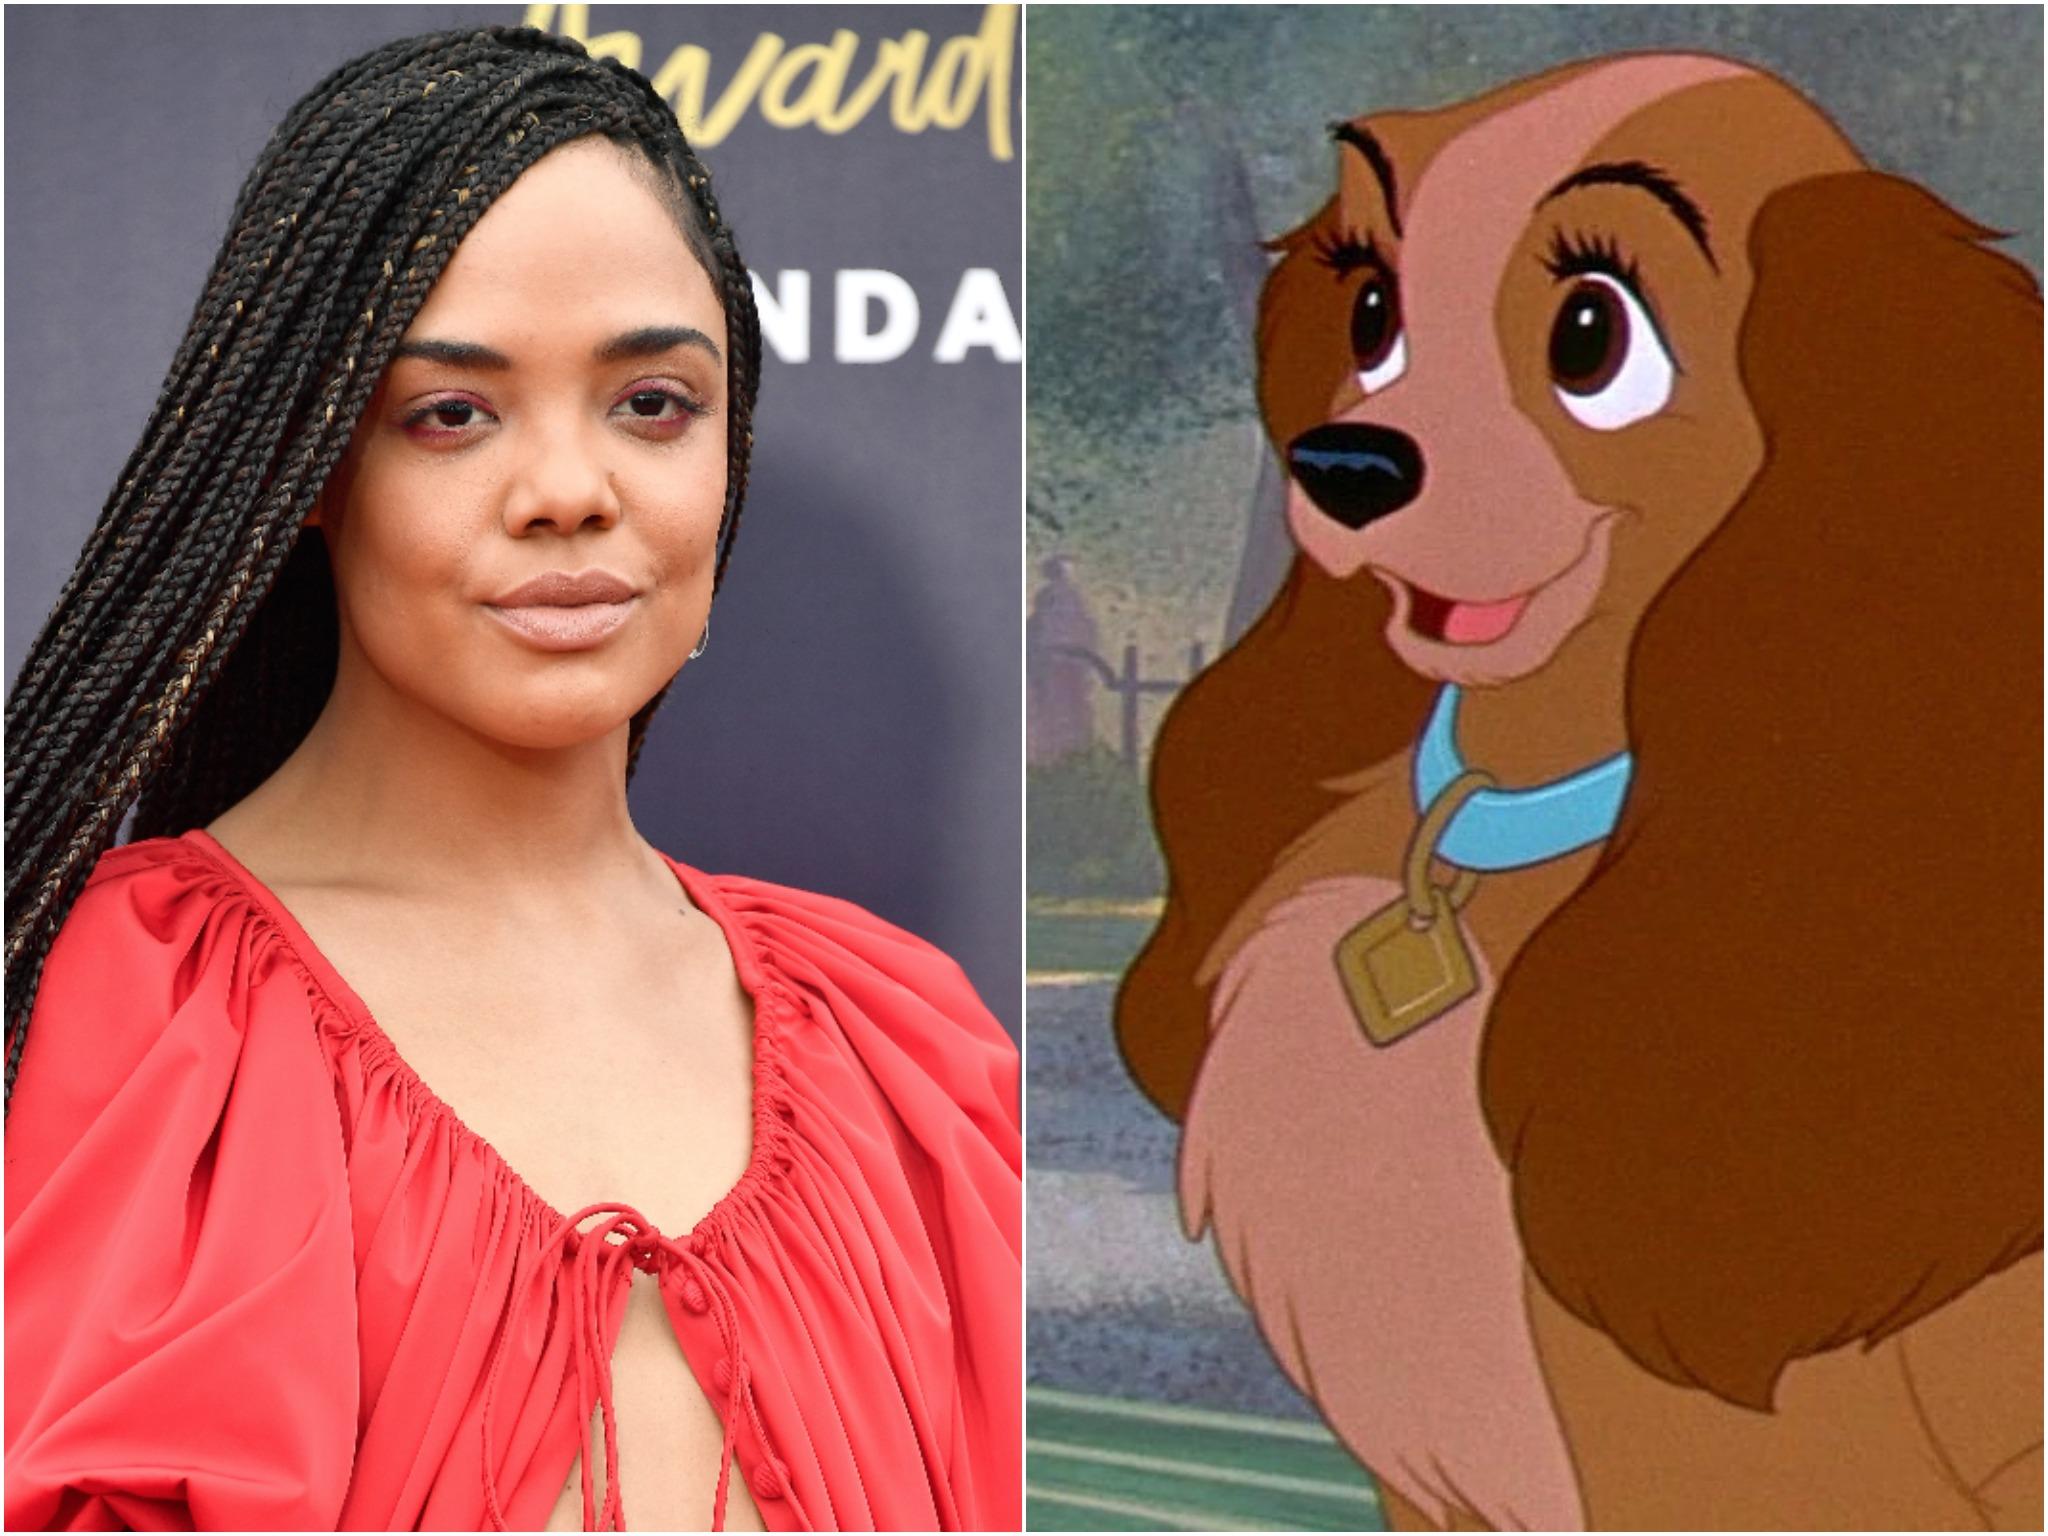 Tessa Thompson will voice Lady in the upcoming remake of Lady and the Tramp